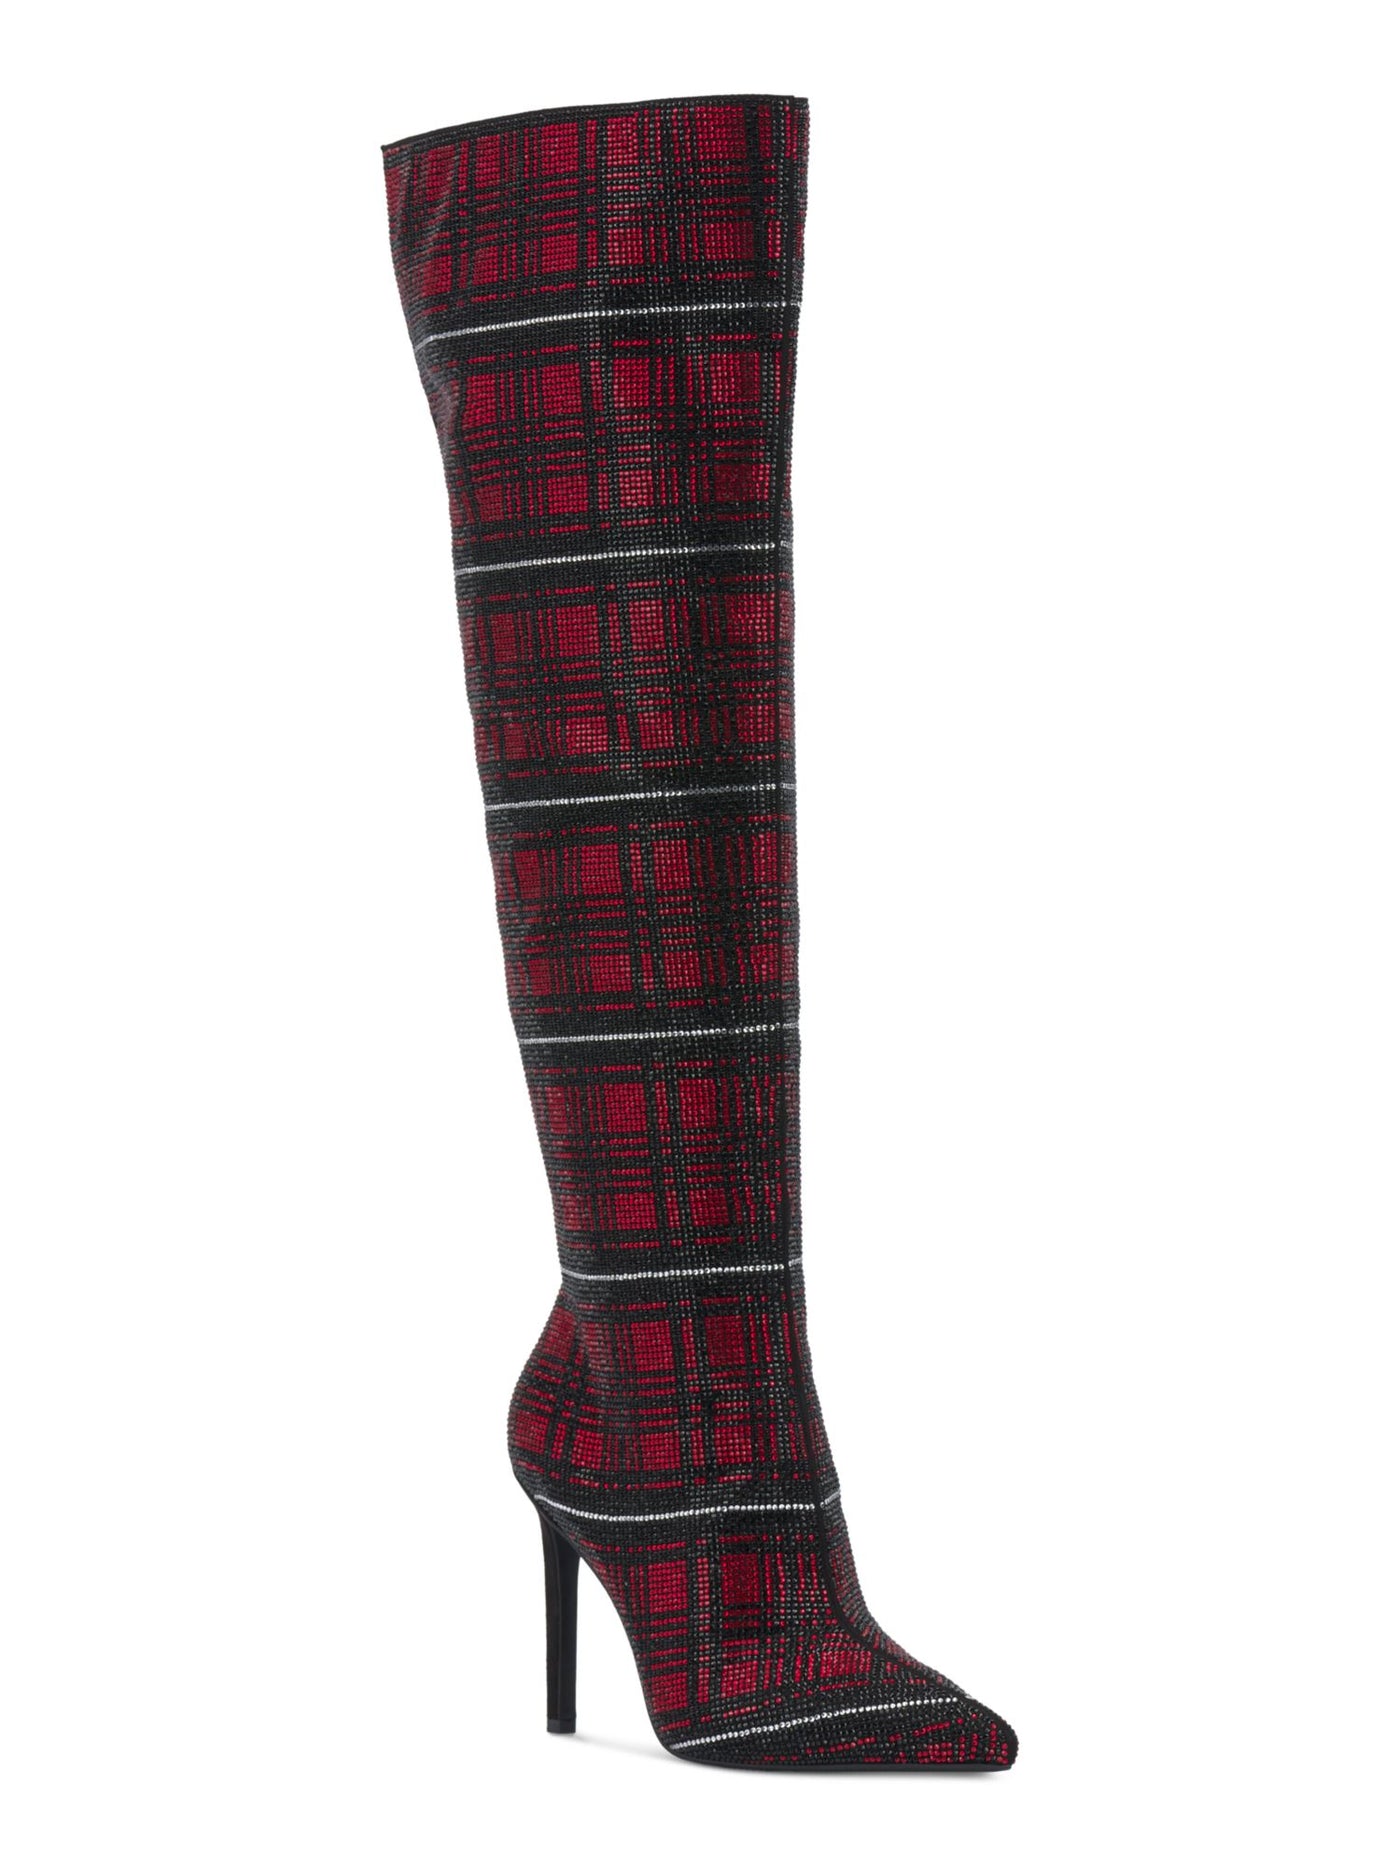 INC Womens Red Plaid Vented Back Padded Rhinestone Goring Saveria Pointed Toe Stiletto Zip-Up Dress Boots 5 M